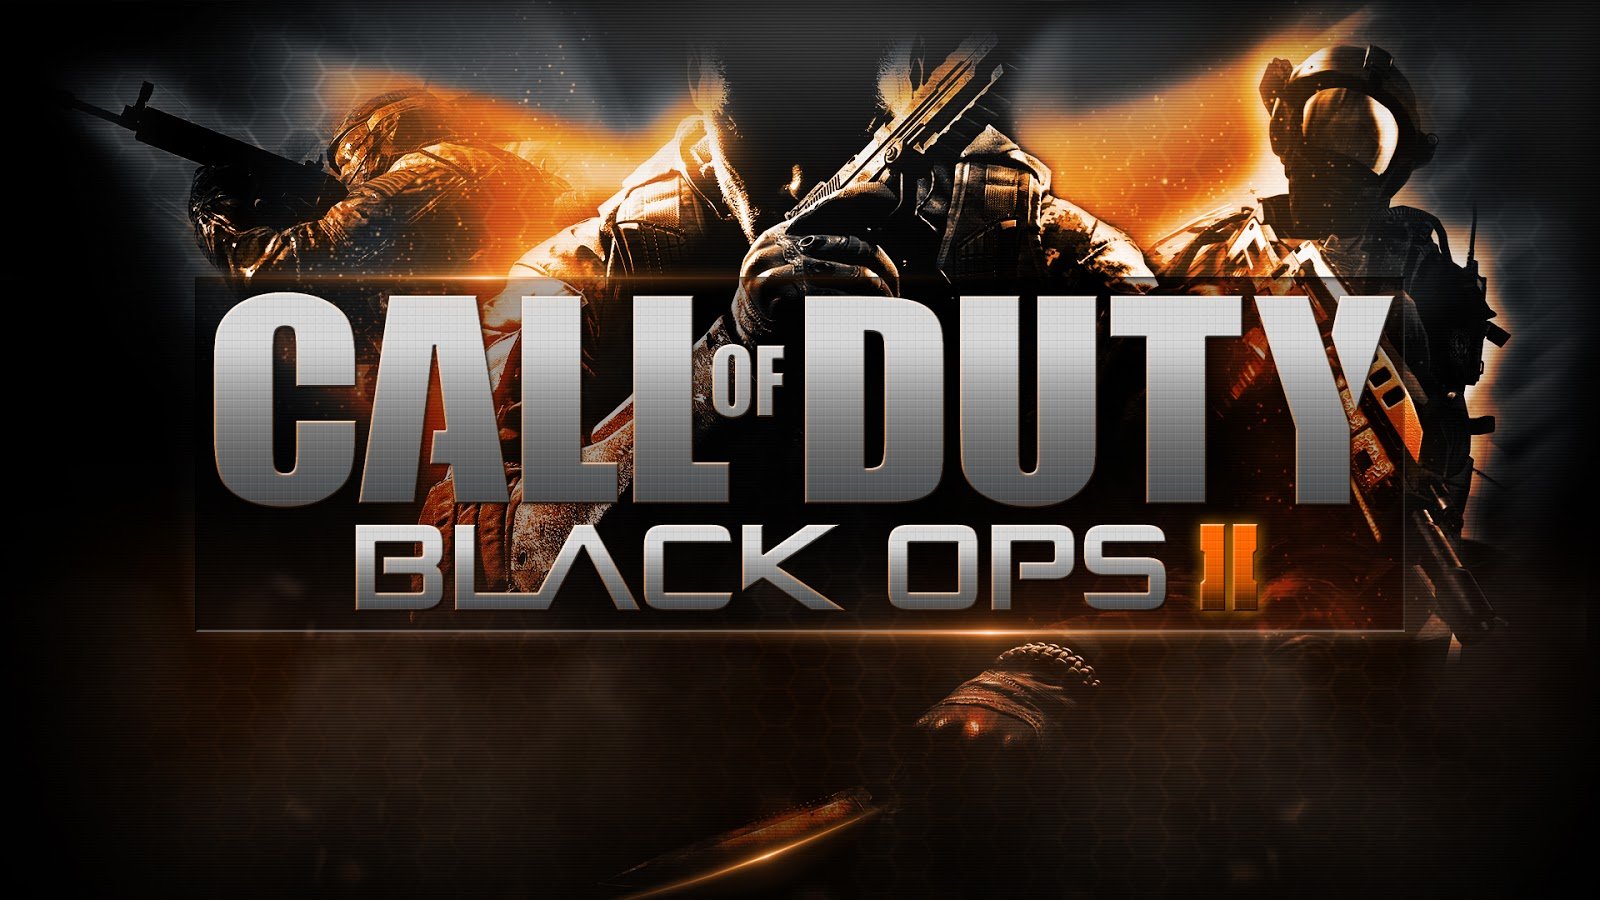 HD WALLPAPERS Call of Duty Black ops HD Wallpapers